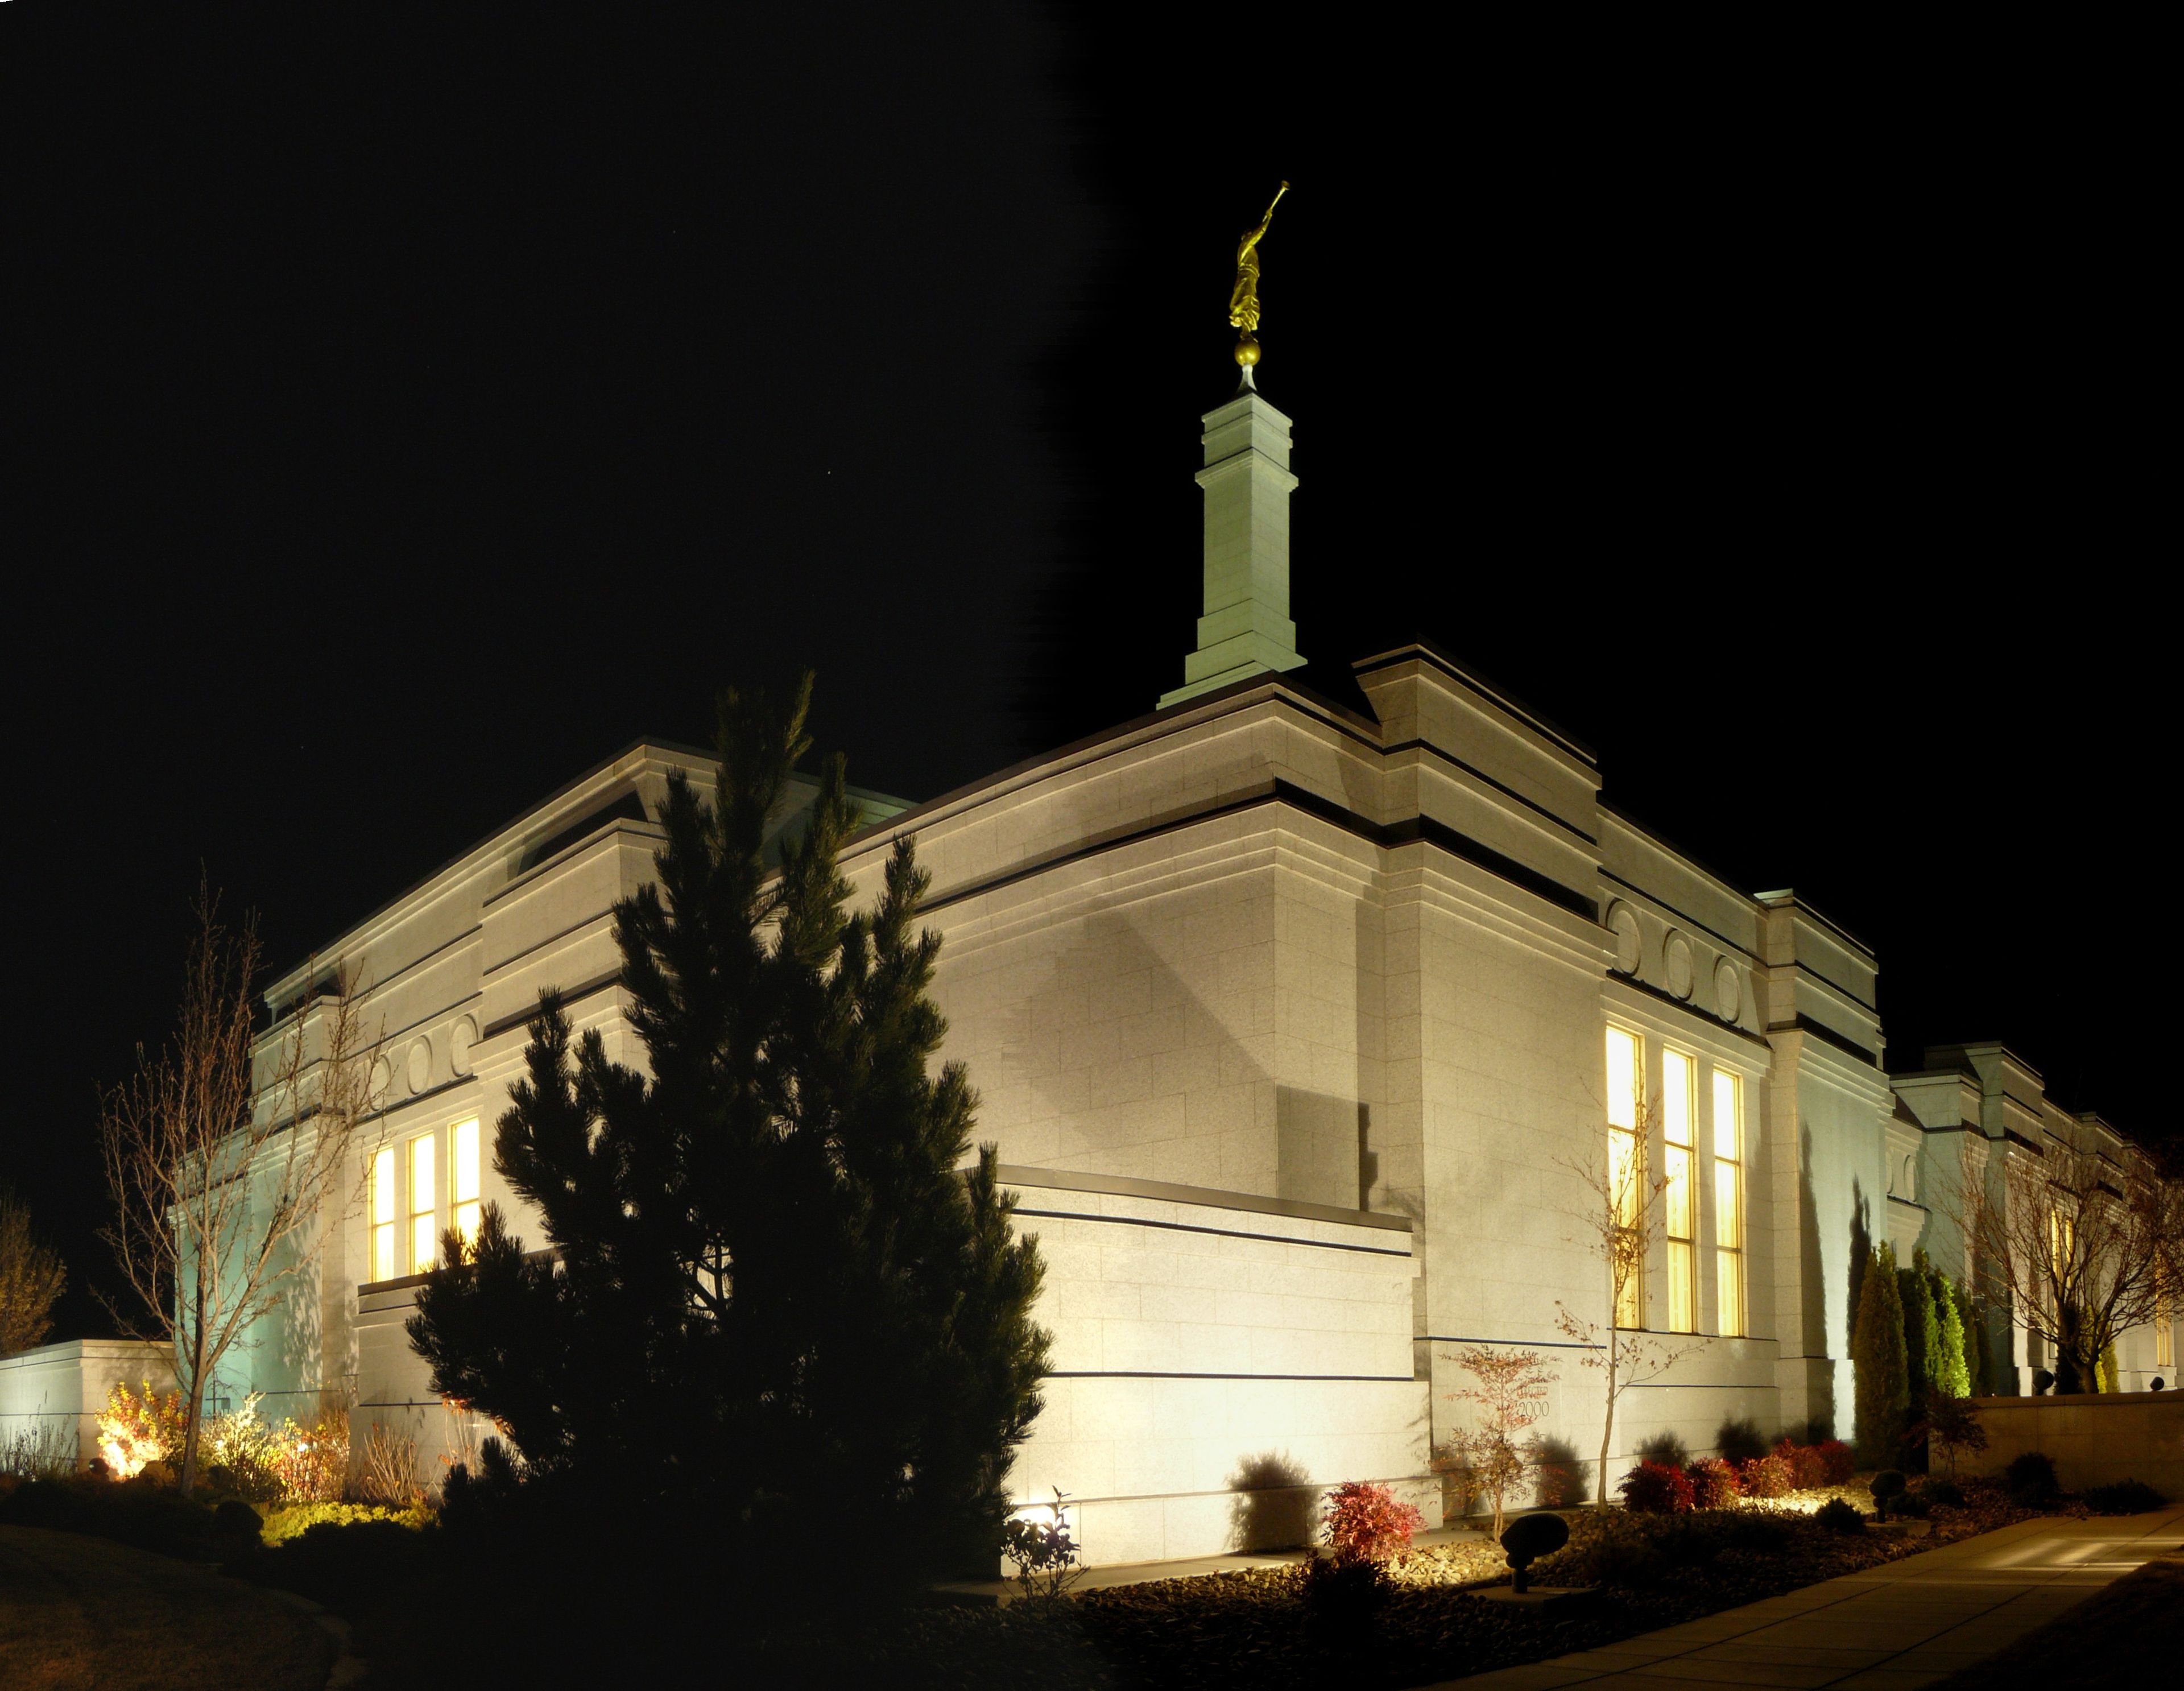 The Reno Nevada Temple in the evening, including scenery.